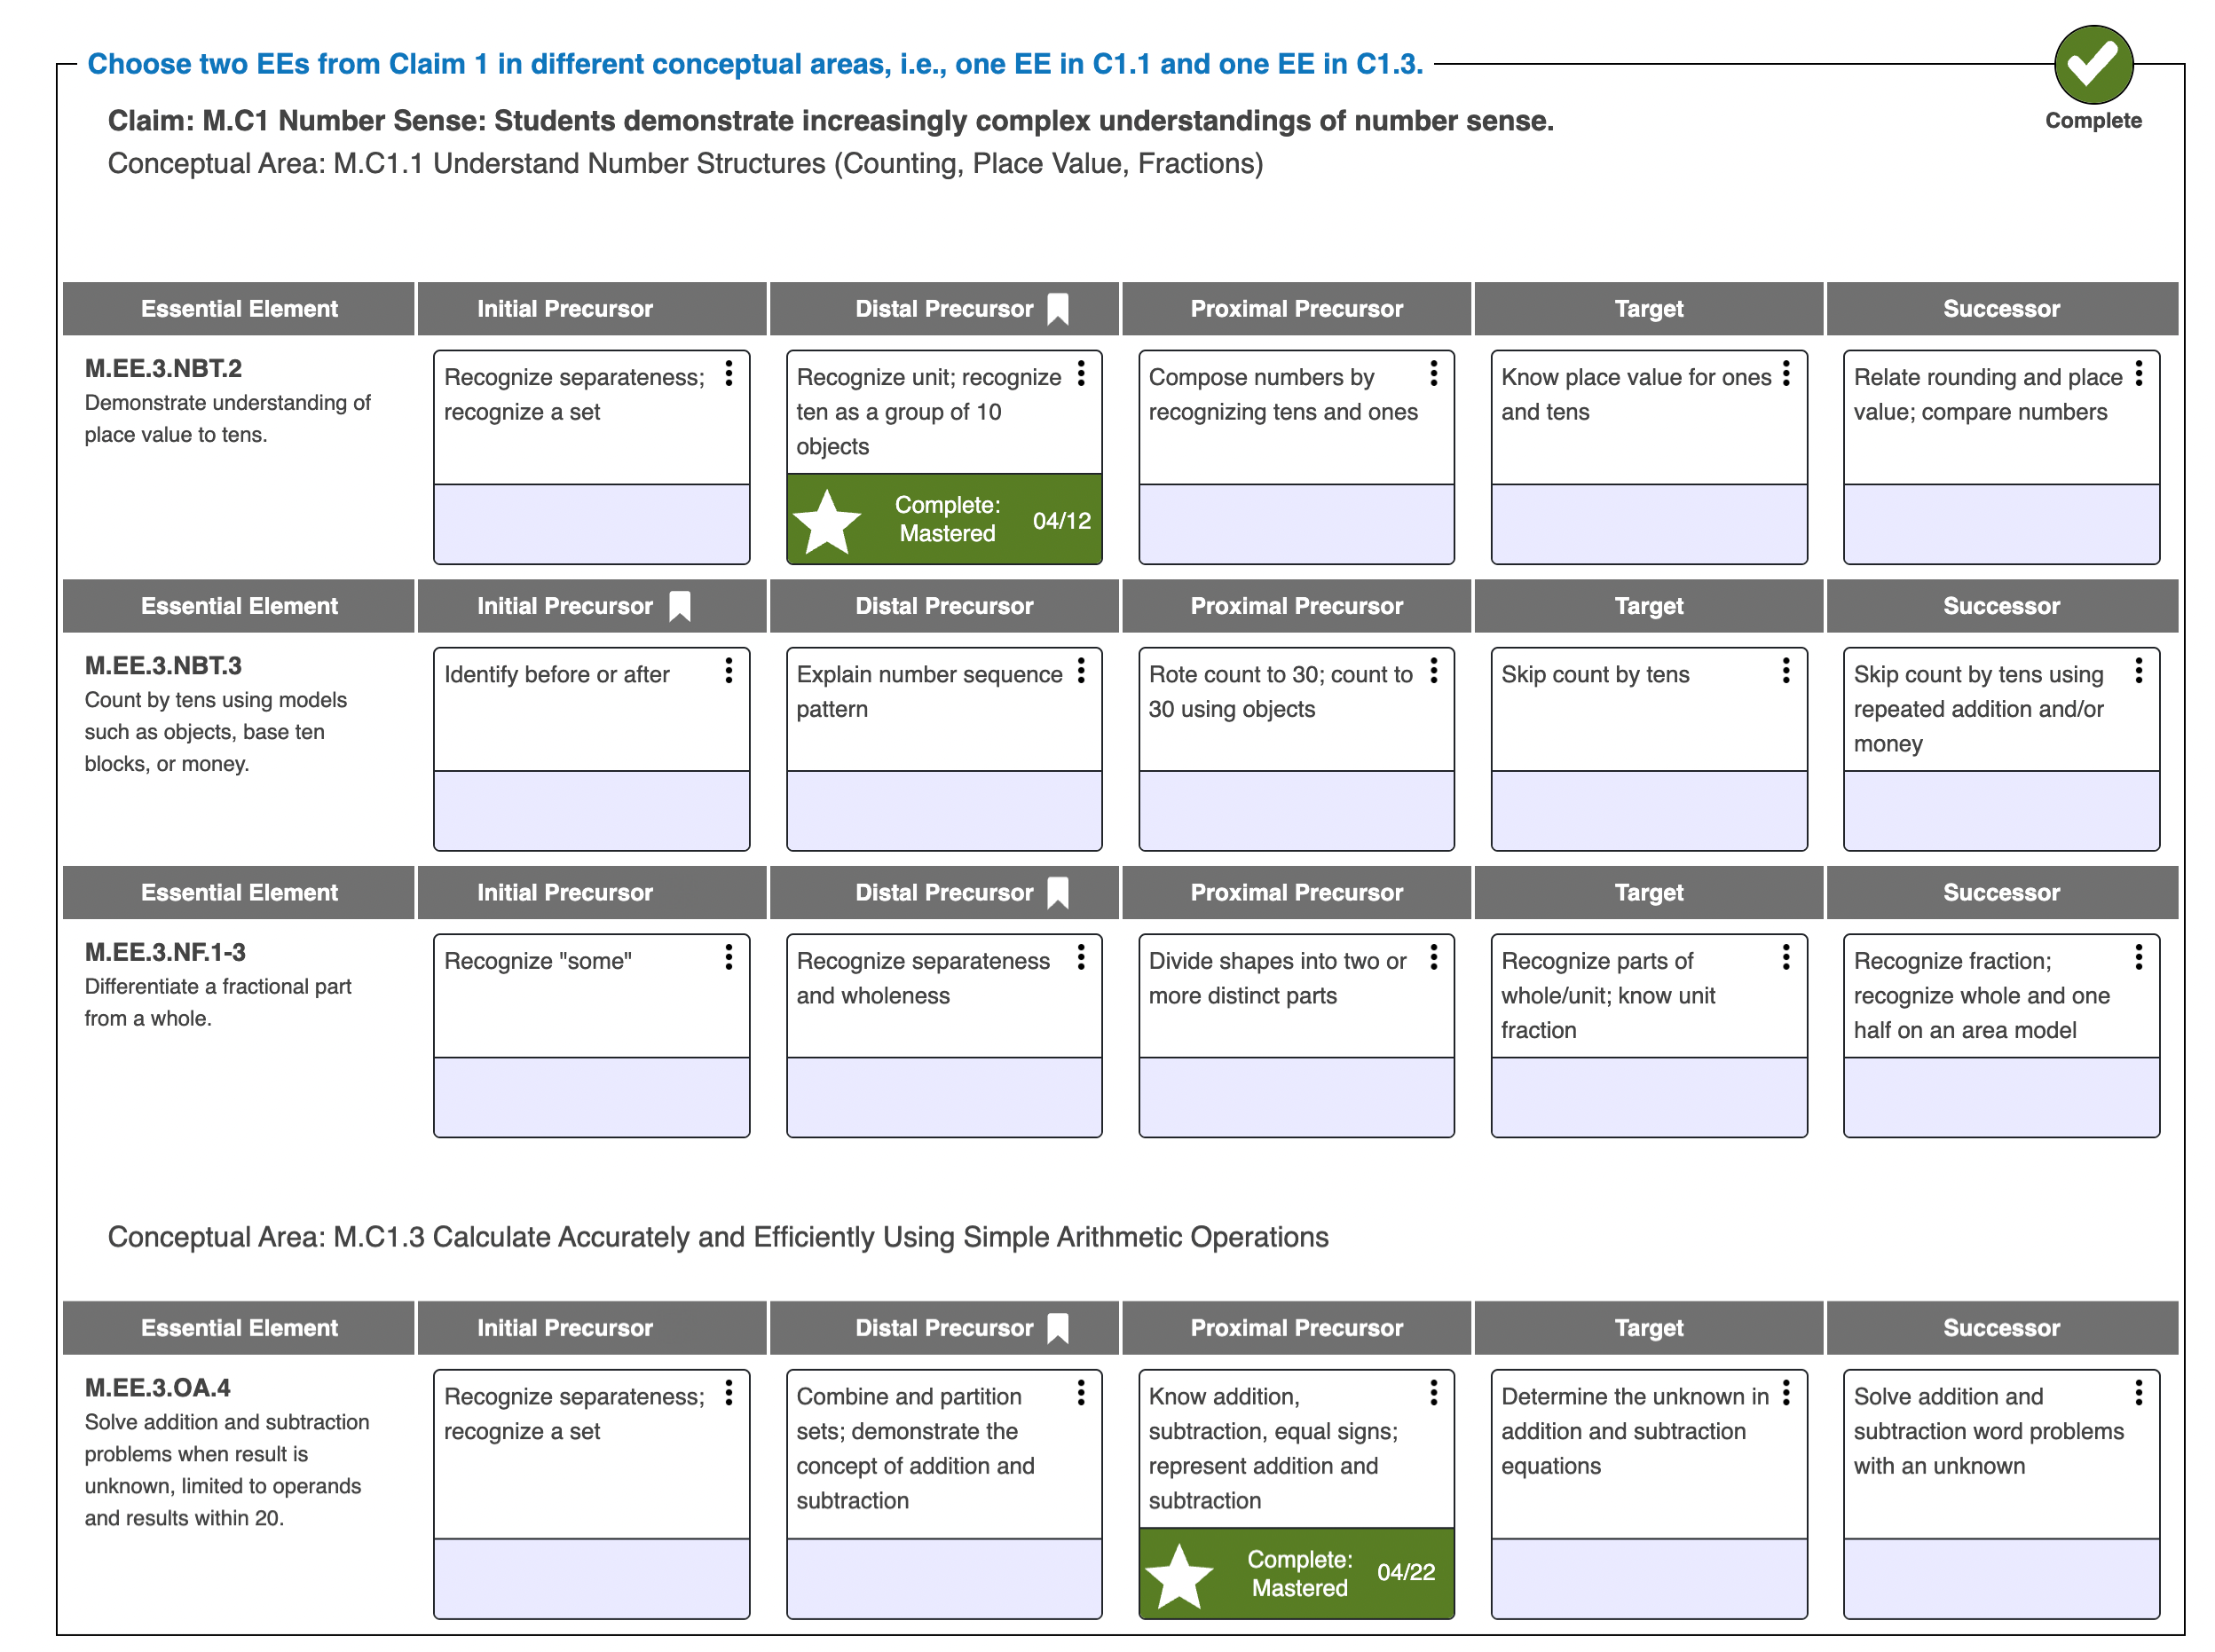 A screenshot of the Instruction and Assessment planner showing a student's testing, as described in the text.